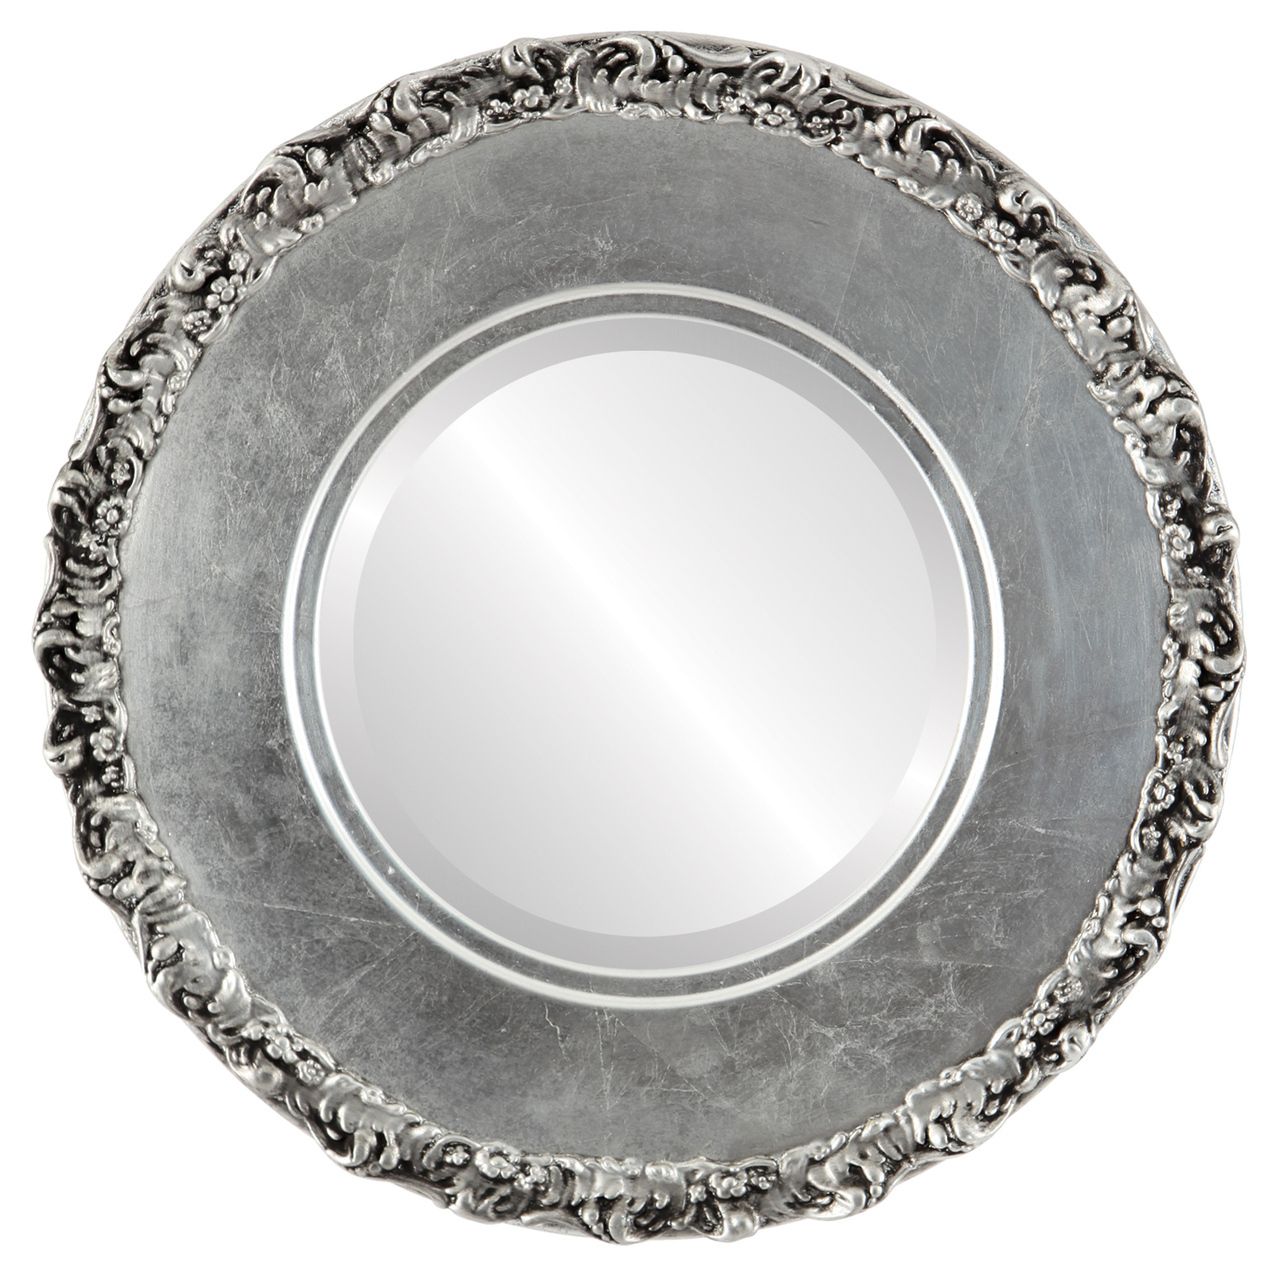 Antique Silver Round Mirrors From $153 | Free Shipping Intended For Silver Leaf Round Wall Mirrors (View 4 of 15)